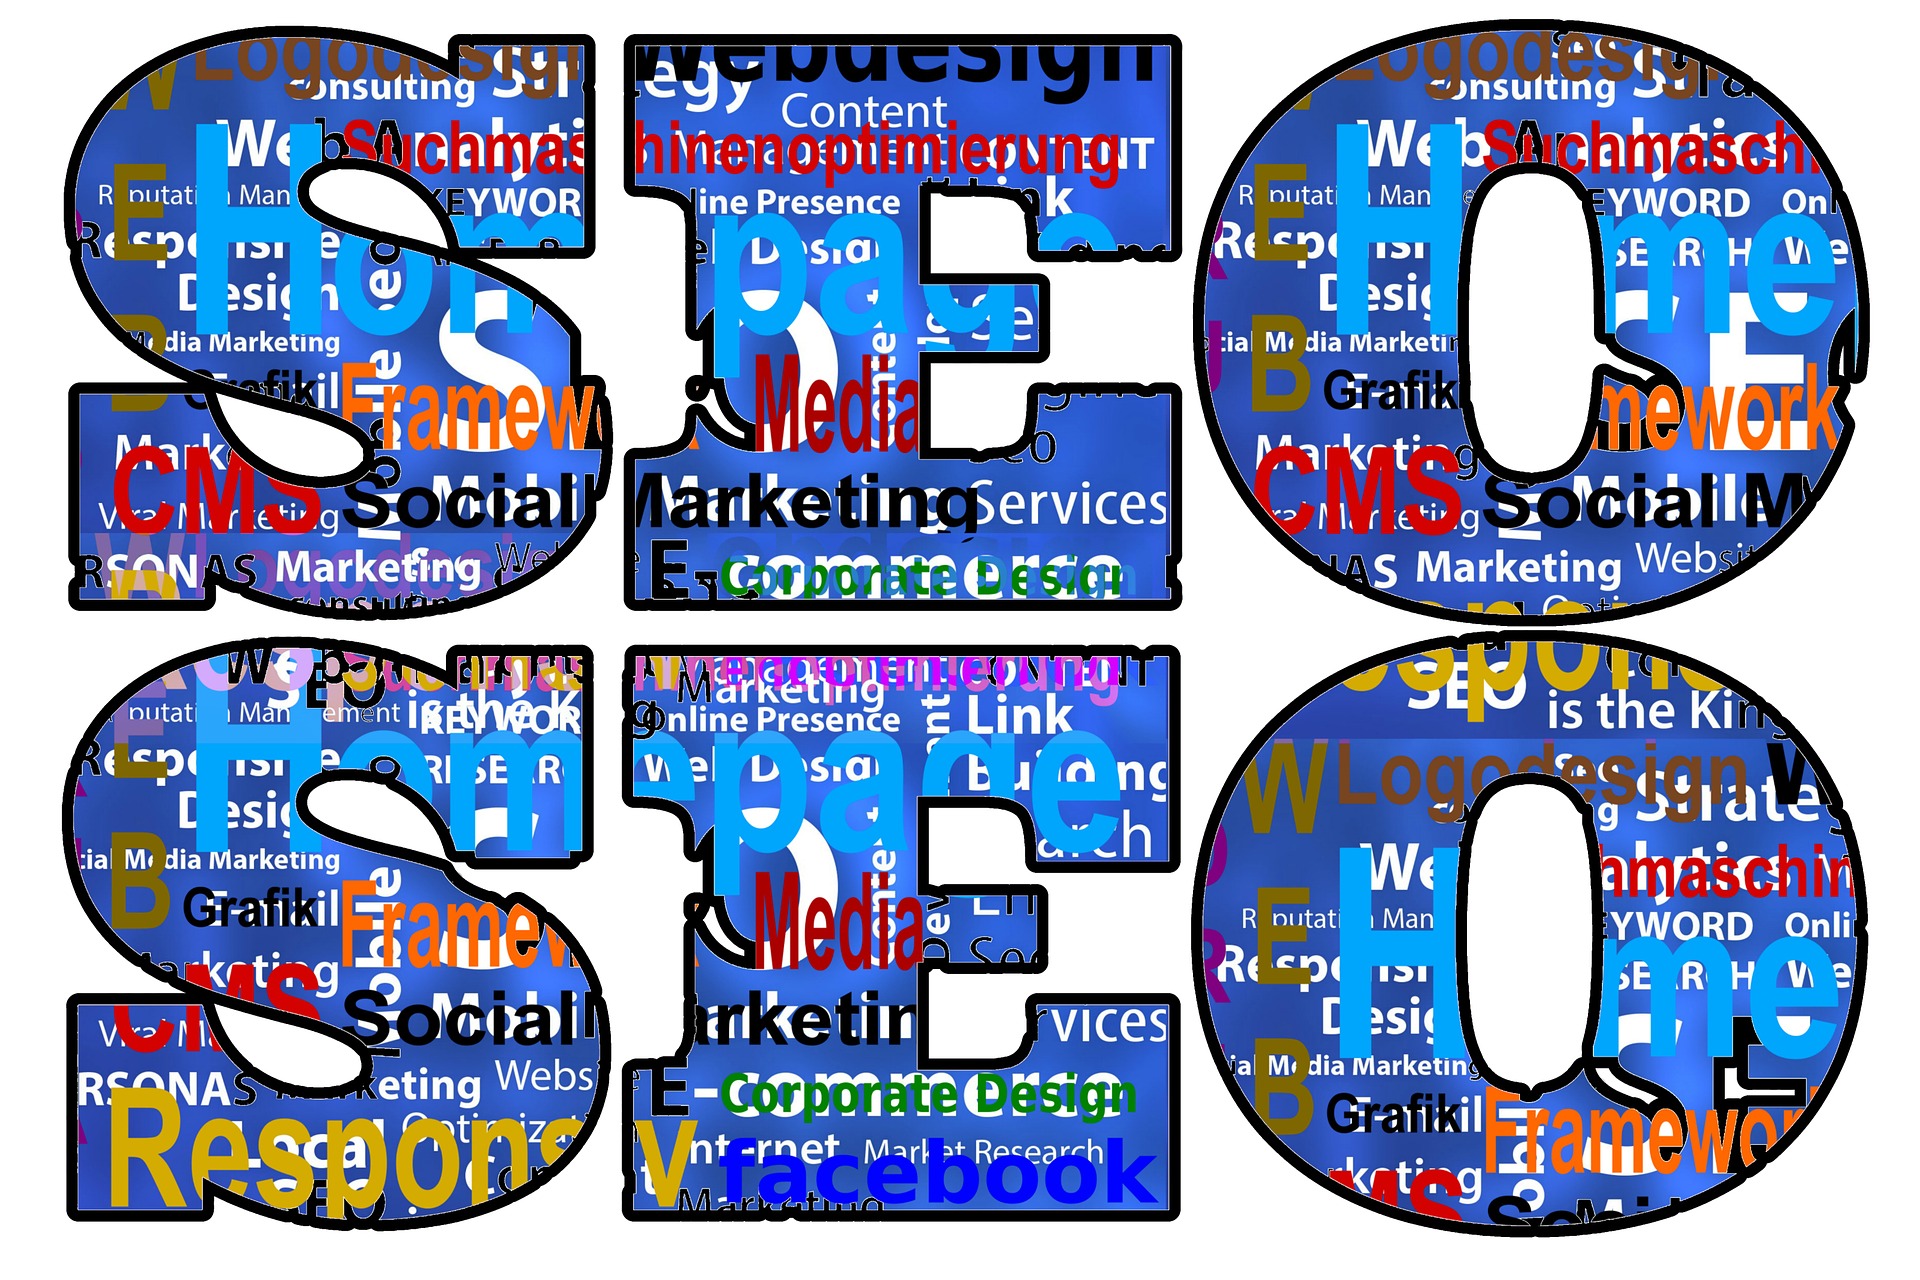 seo is needed for freelance writers